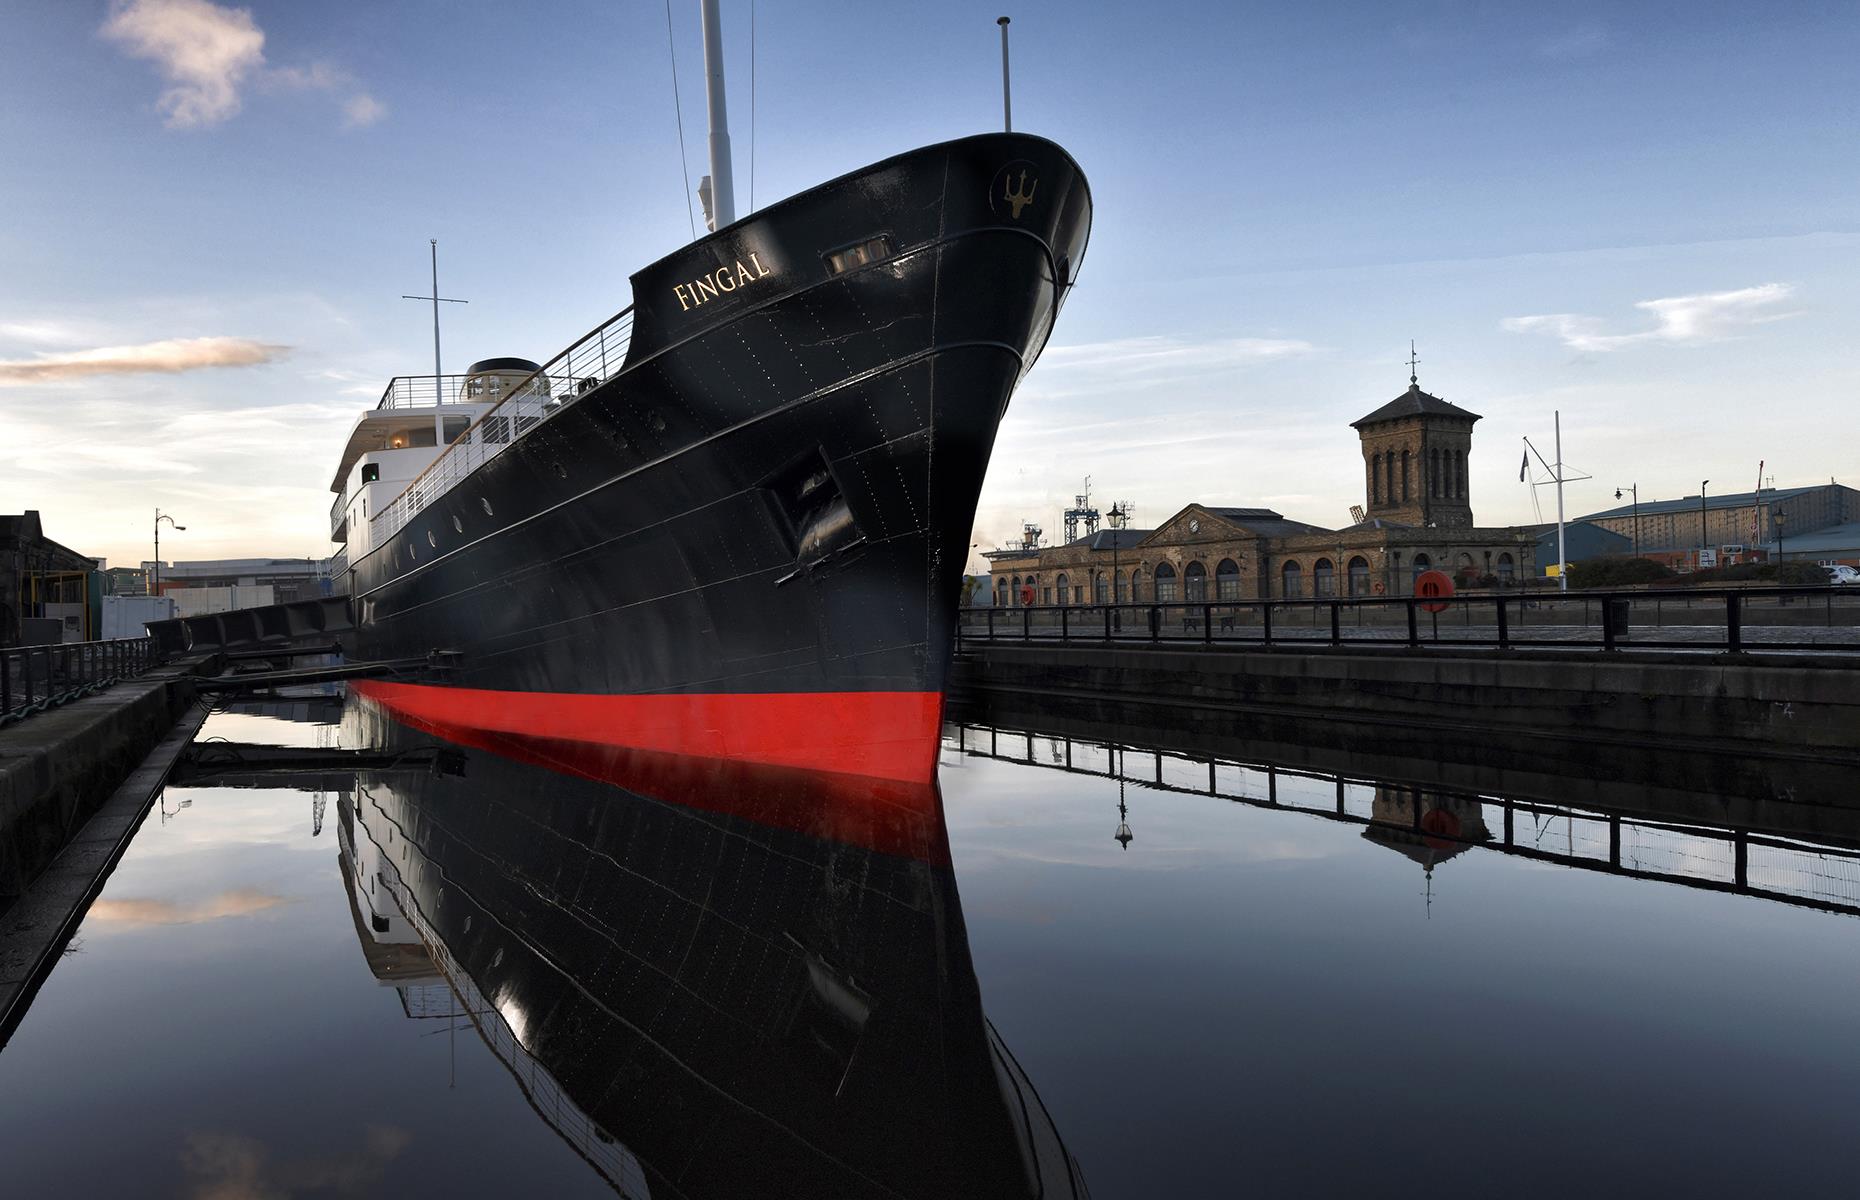 <p>Opened in January 2019, this handsome ship is in fact <a href="https://www.fingal.co.uk">a beautiful 23-room floating hotel</a>, permanently docked in historic Leith in Edinburgh. Once a Northern Lighthouse Board ship, it was revamped by the team at The Royal Yacht Britannia and now offers guests a seriously luxurious stay, with various types of cabin available and a deck with glorious views out to the Scottish capital. </p>